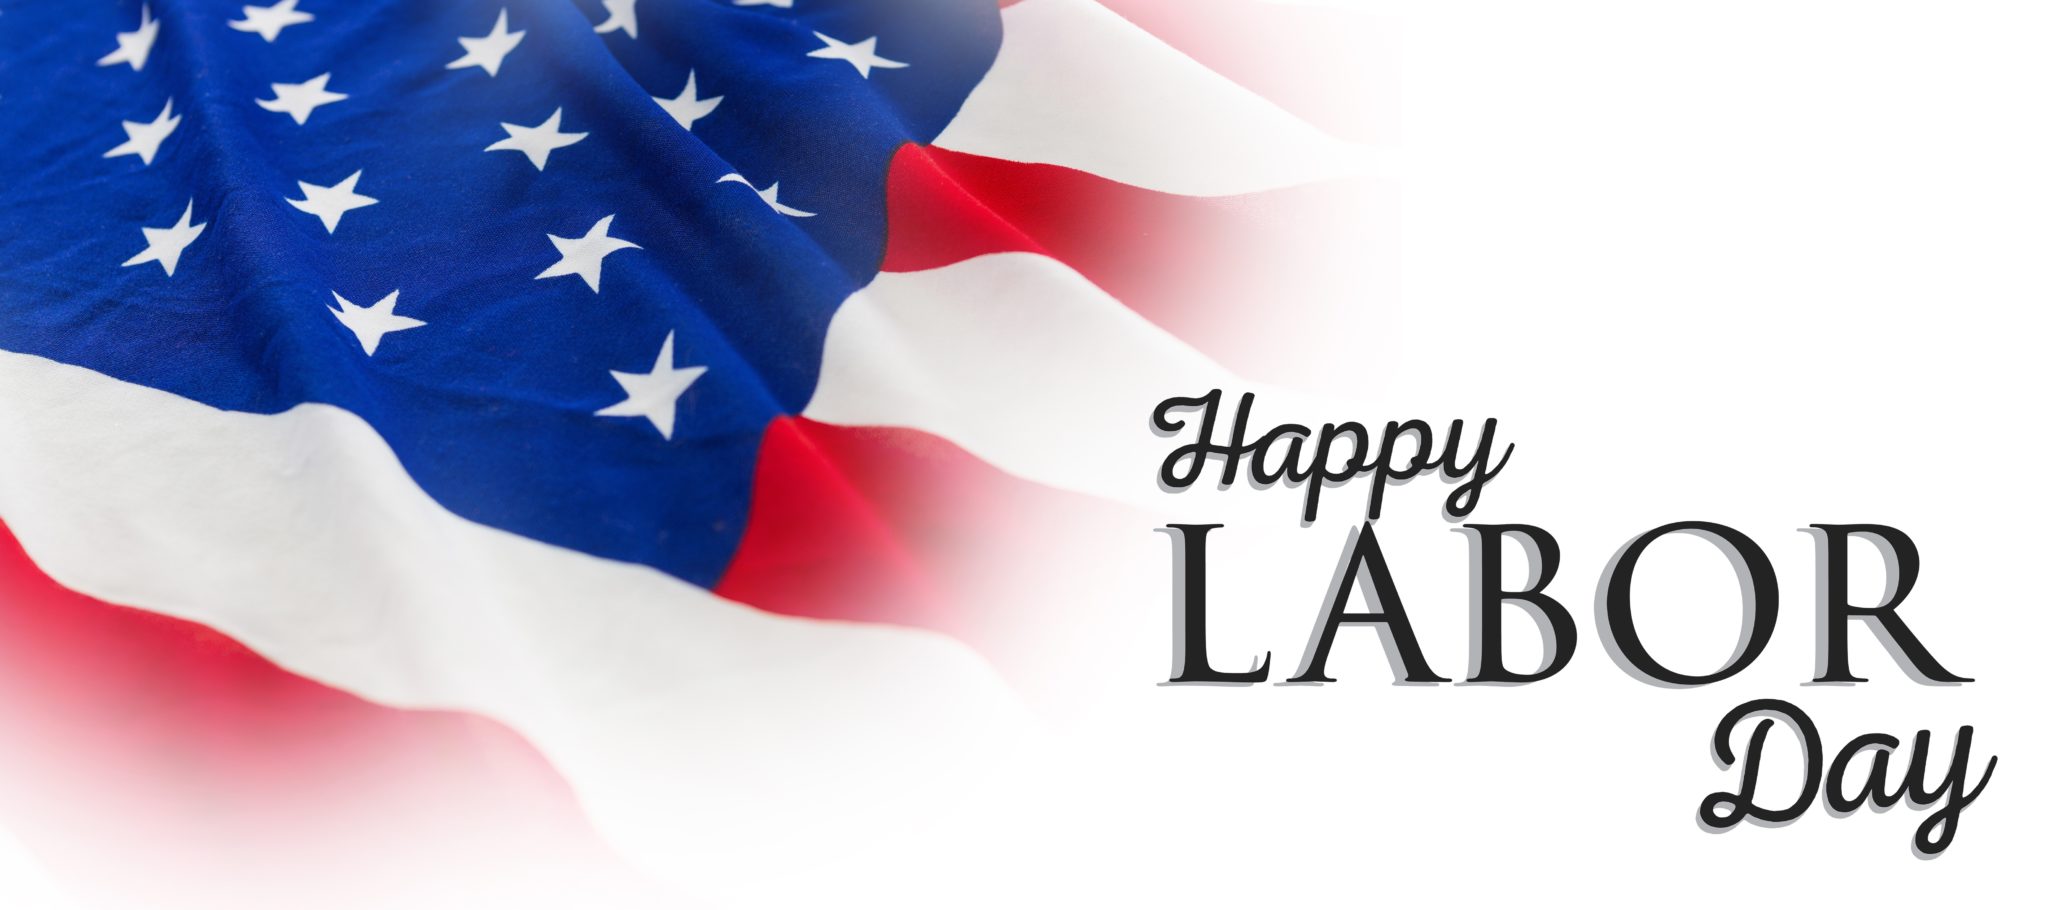 Happy Labor Day weekend! Credit Recovery Group